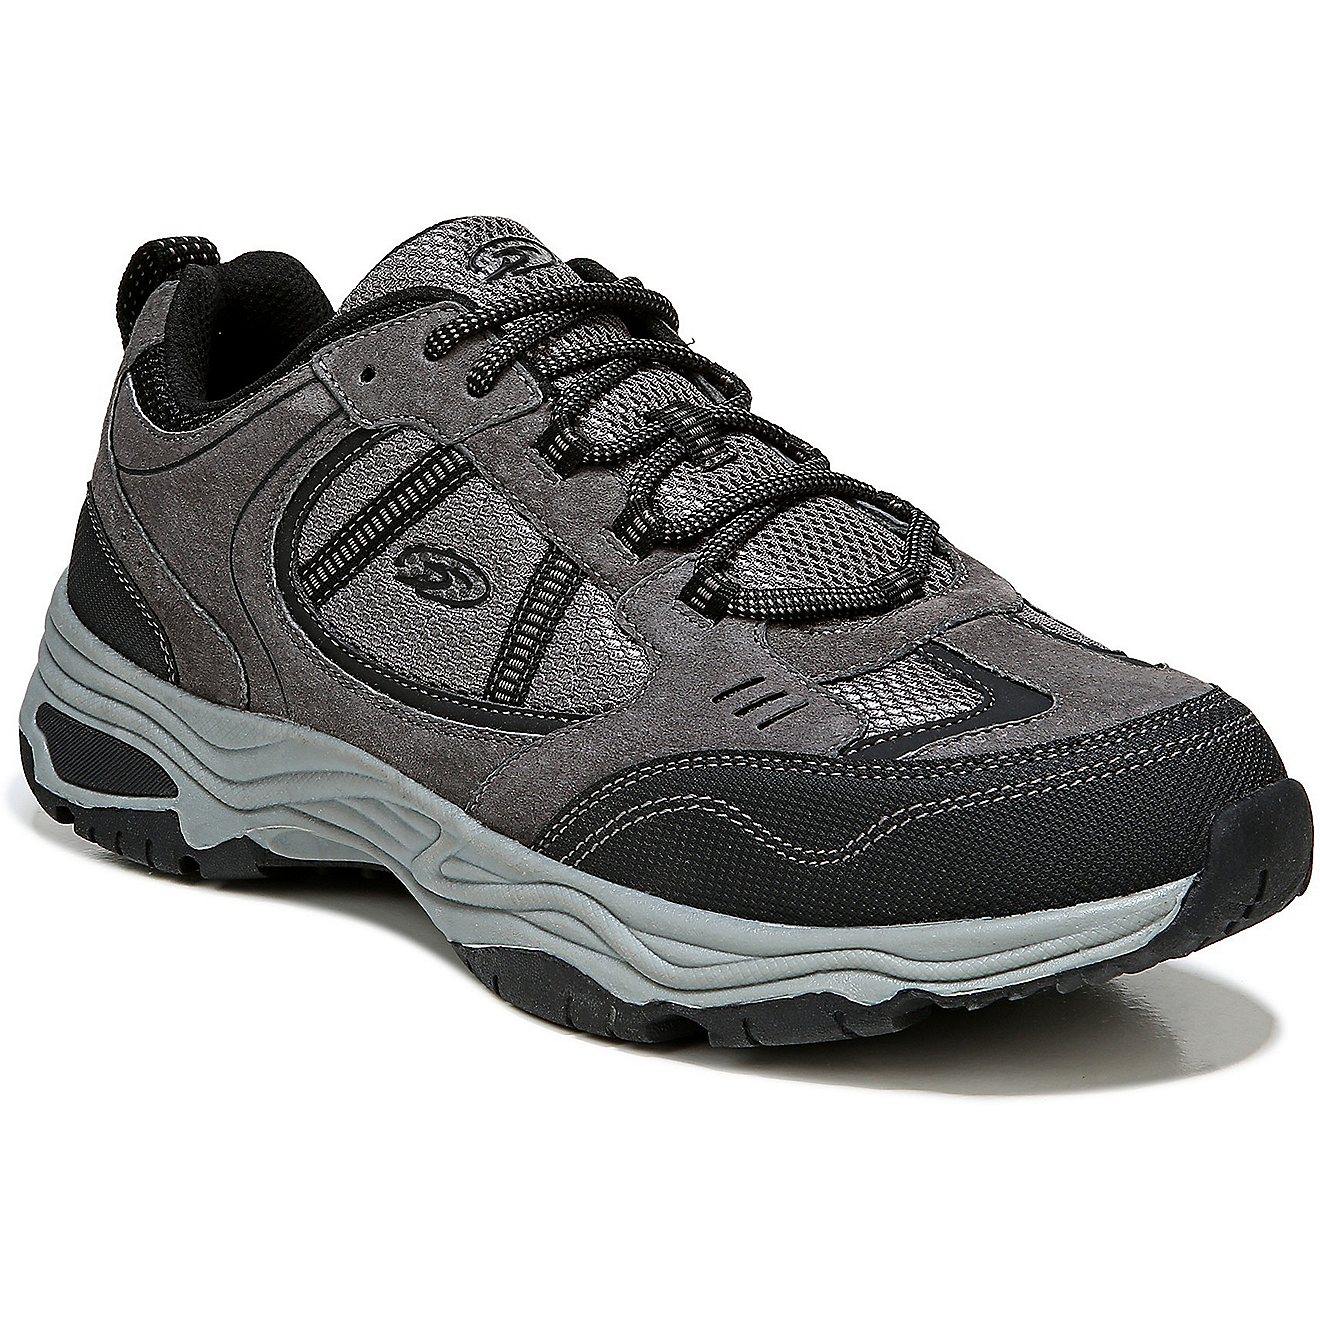 Dr. Scholl's Men's Maximum Shoes | Free Shipping at Academy